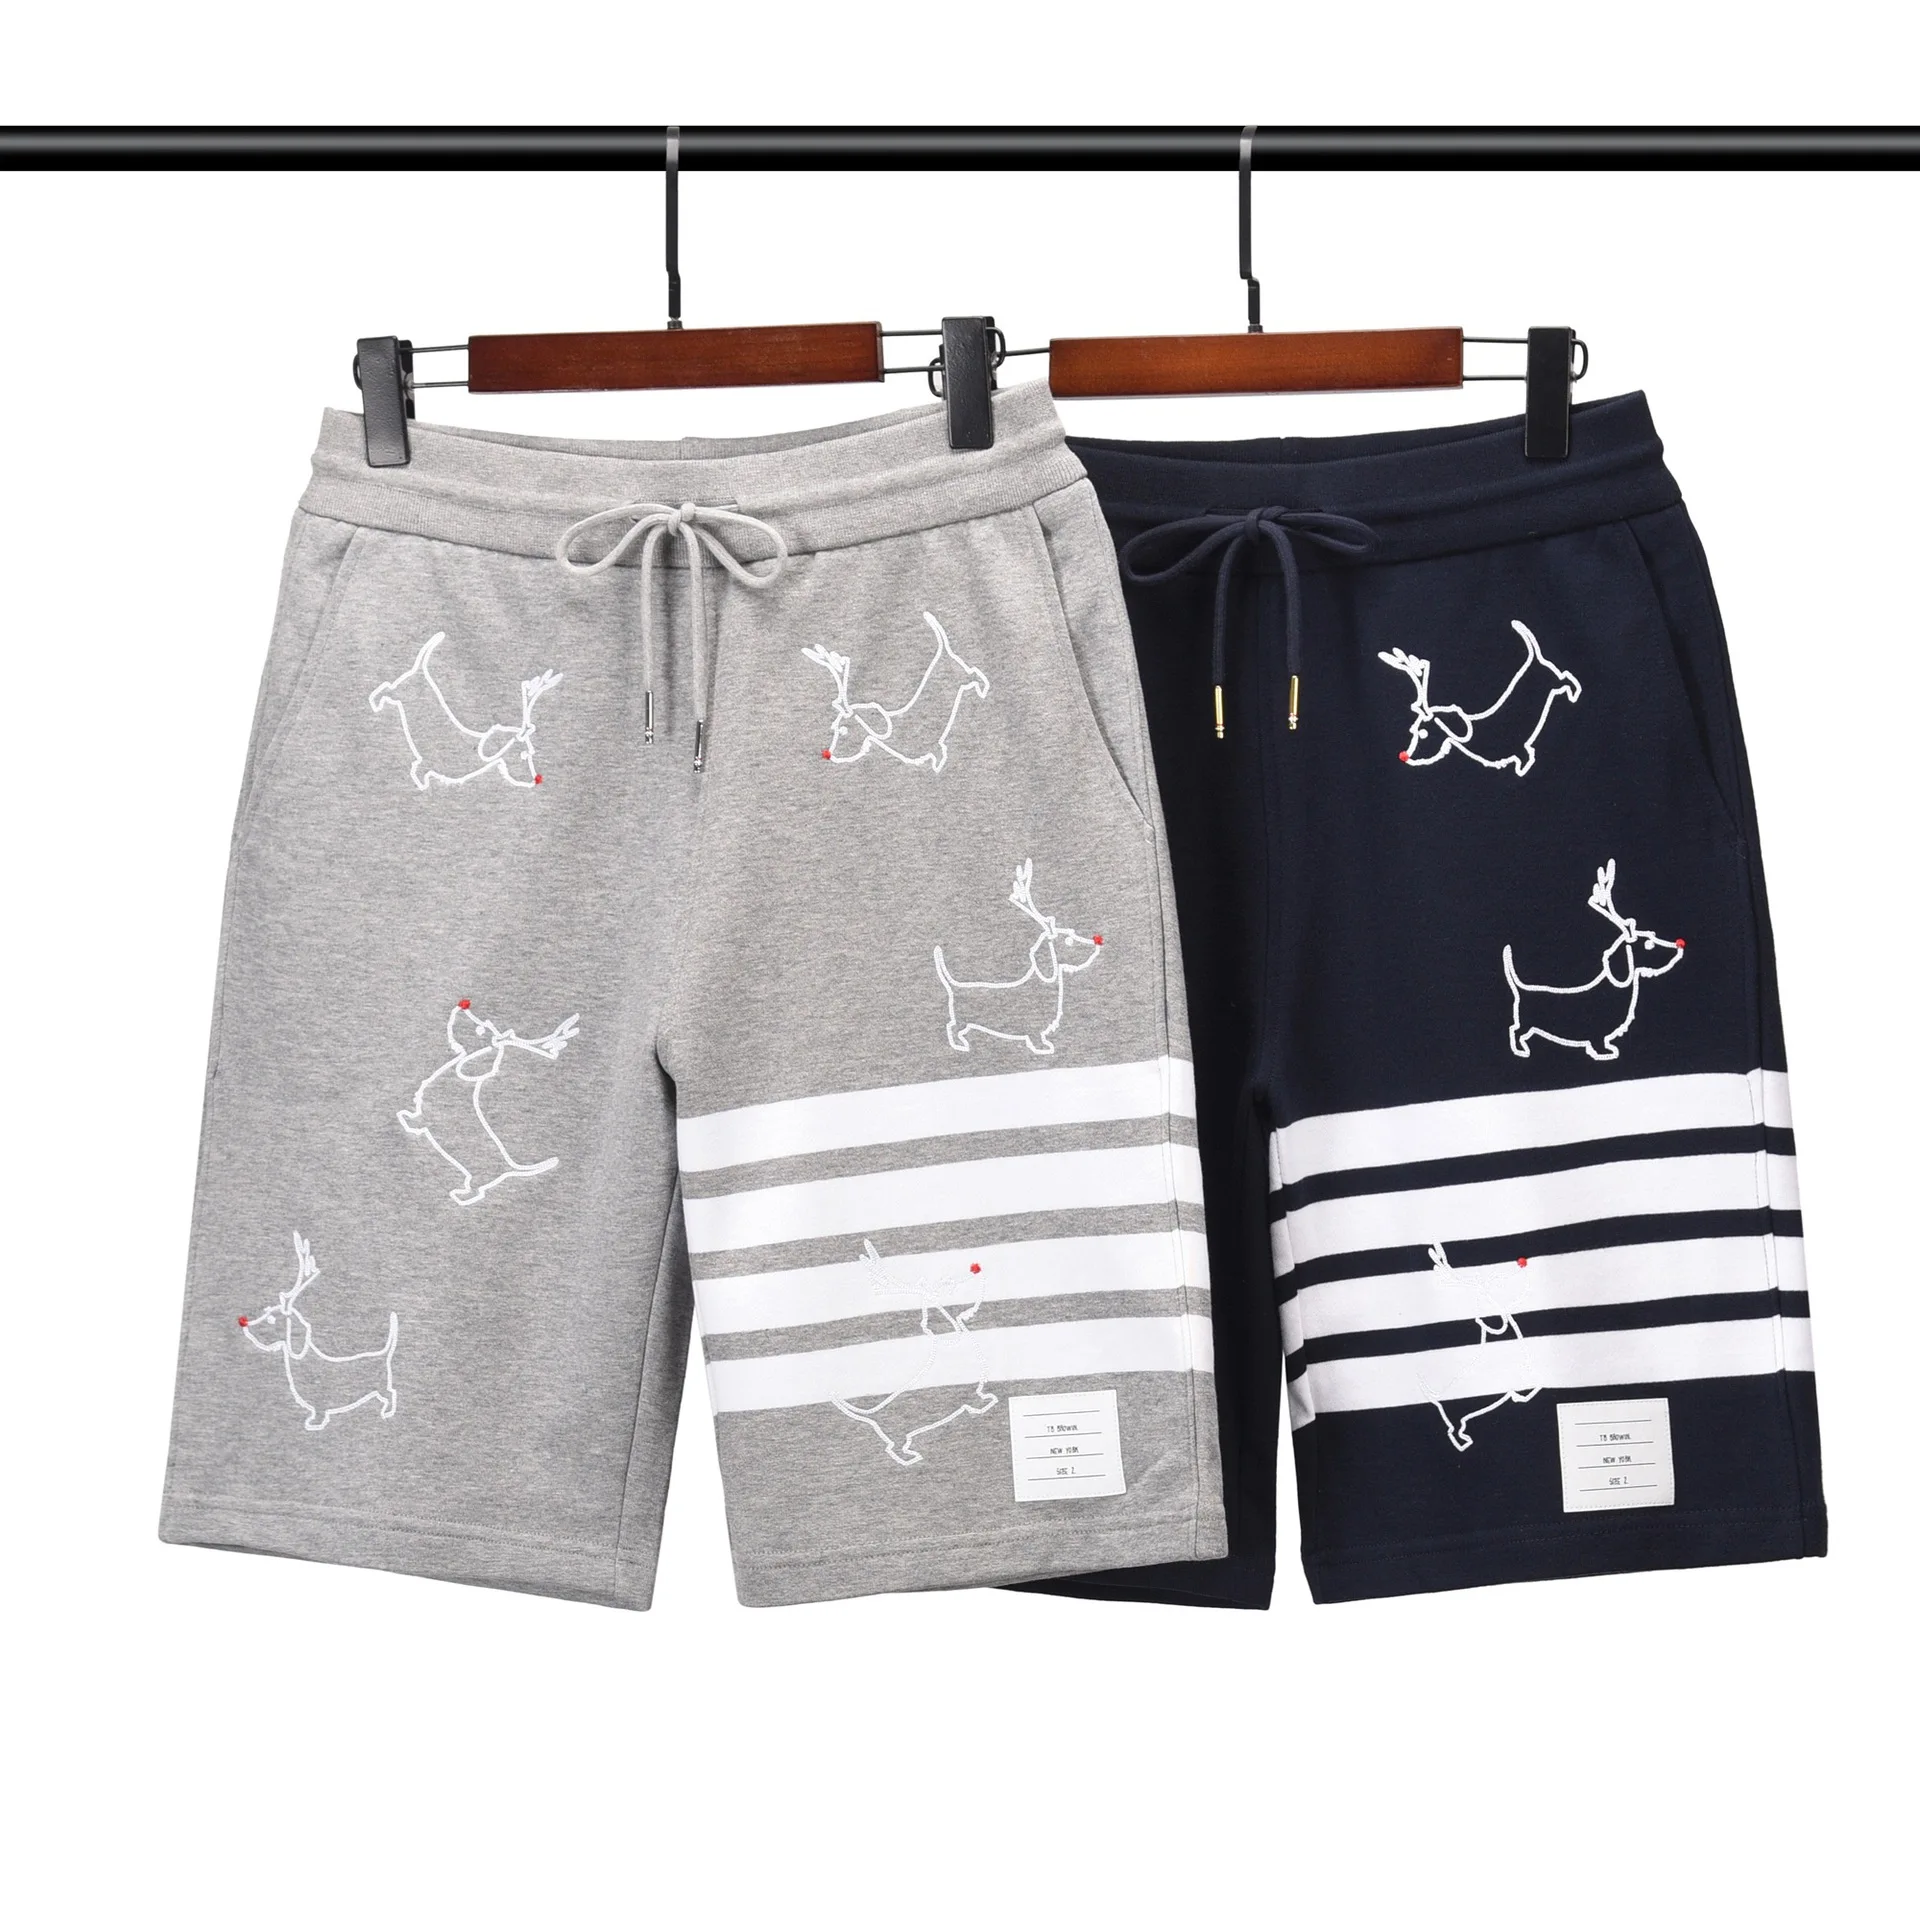 THOM BRUN's new TB Shorts Embroidered new dog summer quarter pants for both men and women